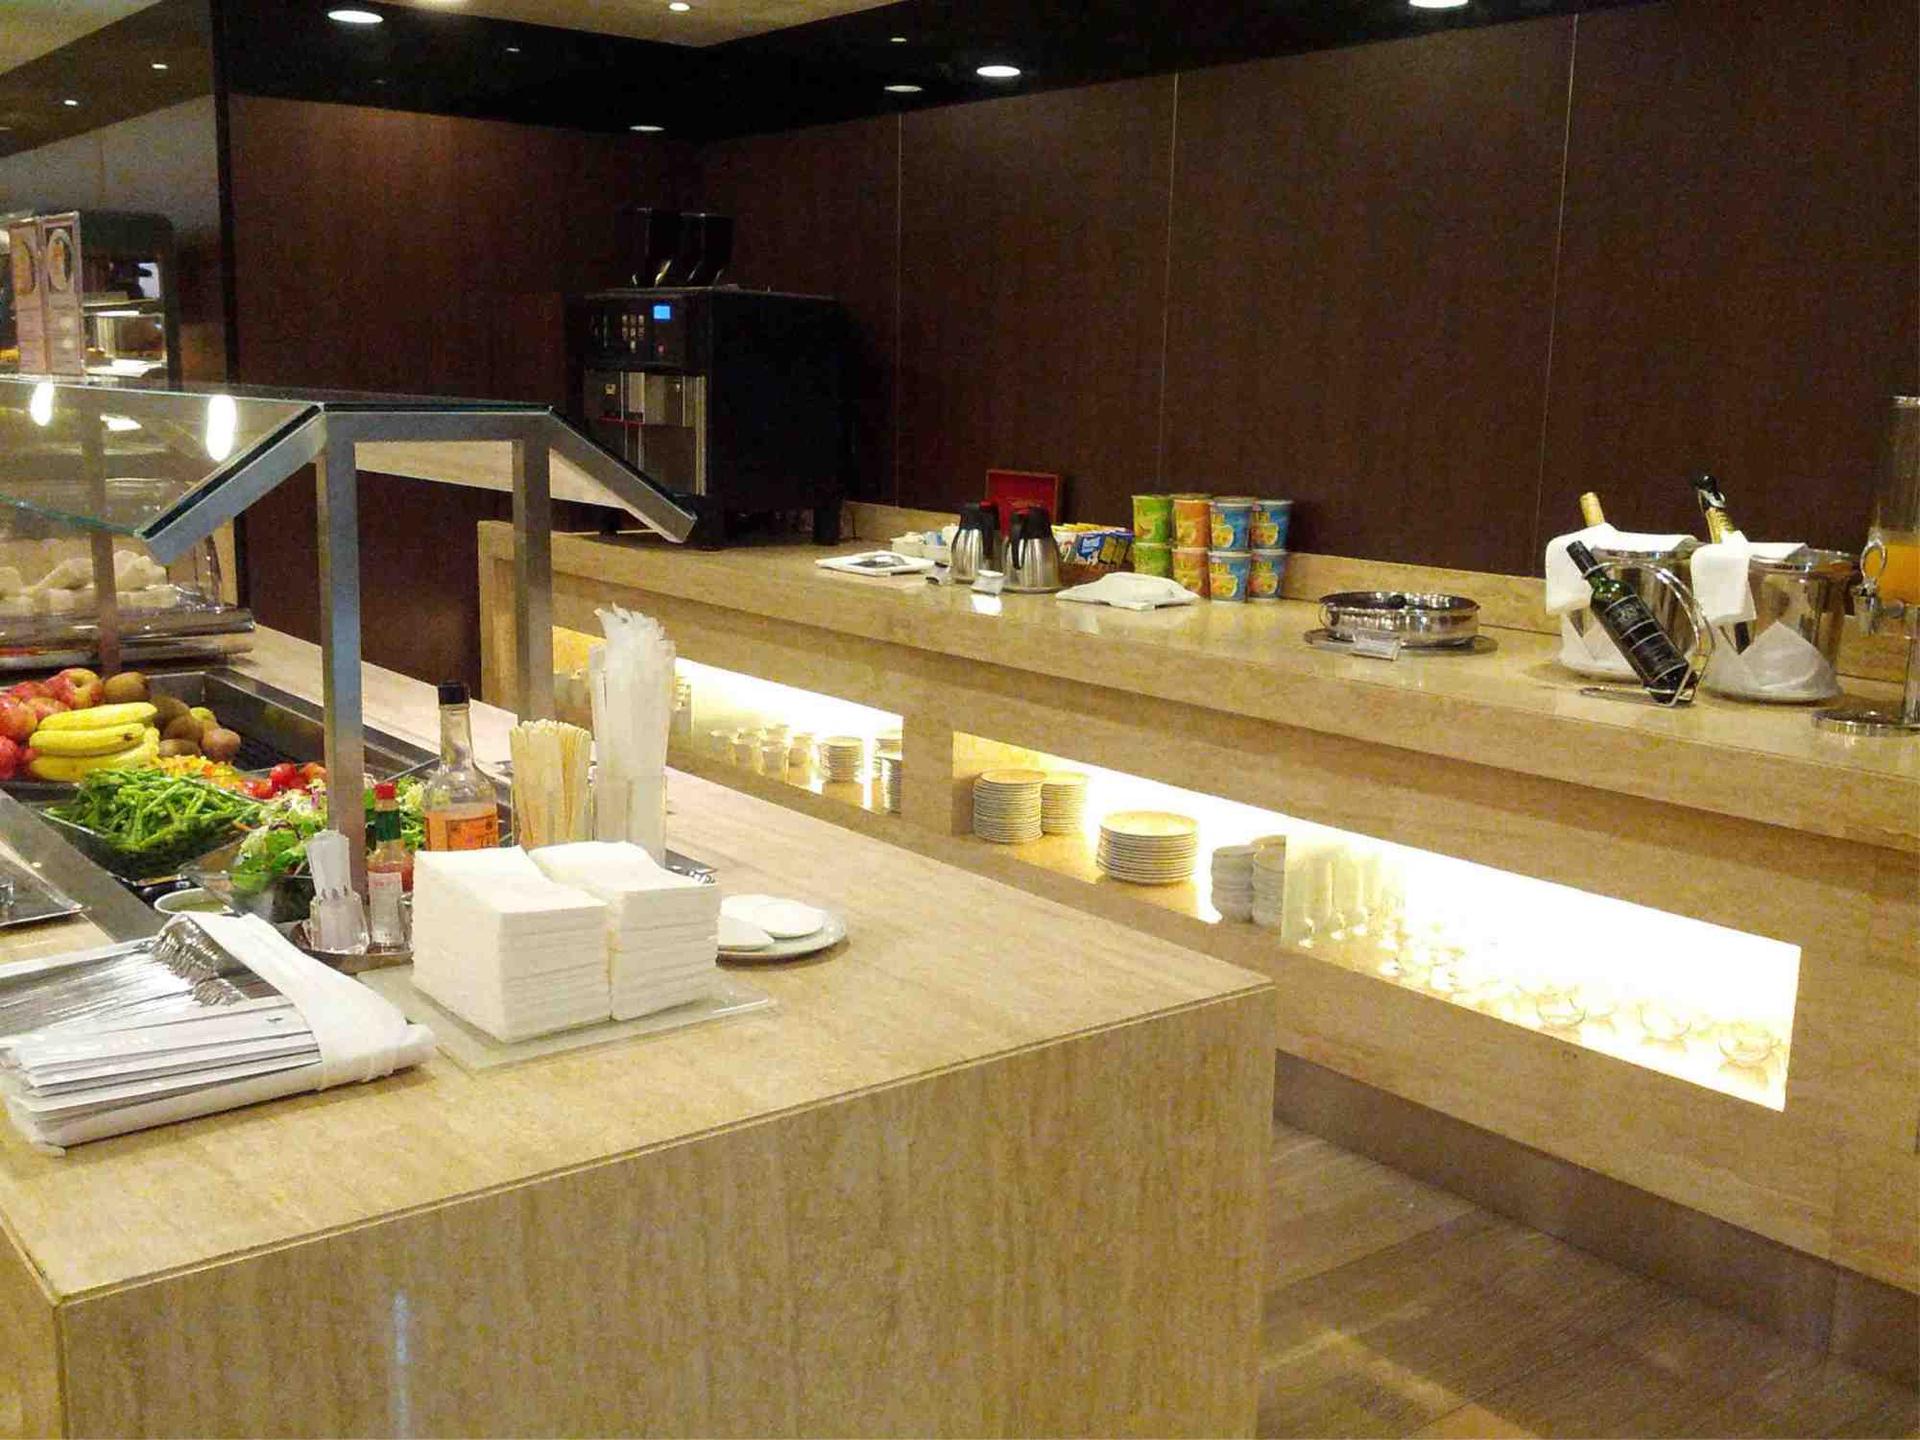 Singapore Airlines SilverKris Business Class Lounge image 6 of 68